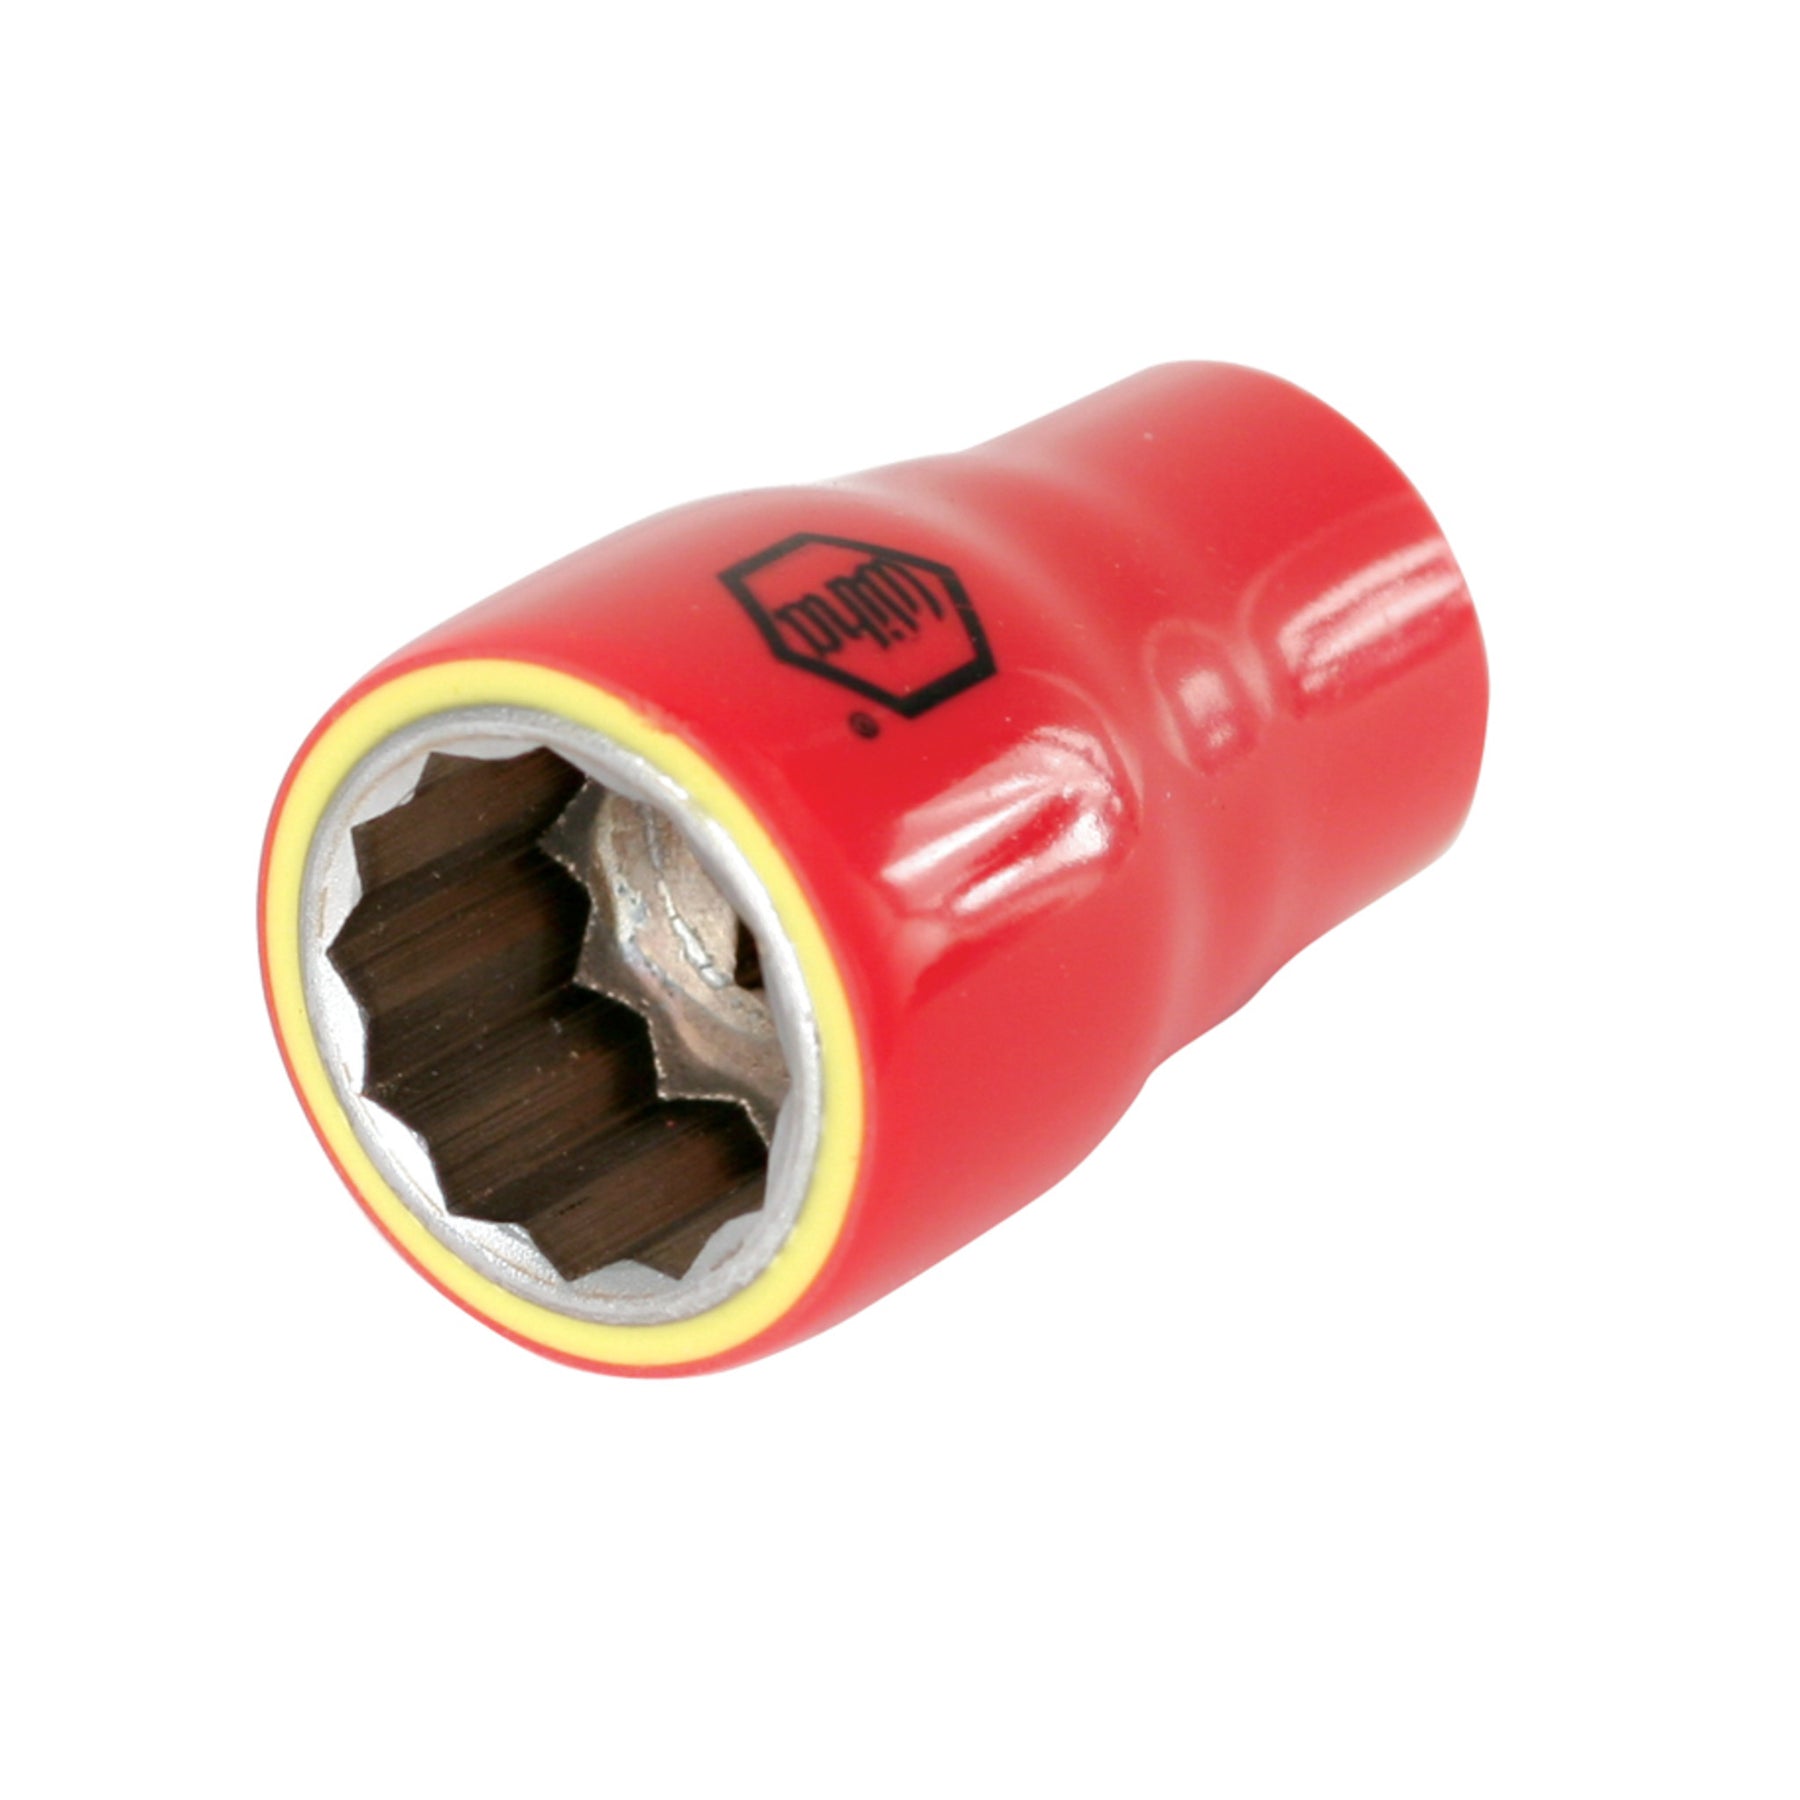 Insulated Socket 1/2" Drive 16mm